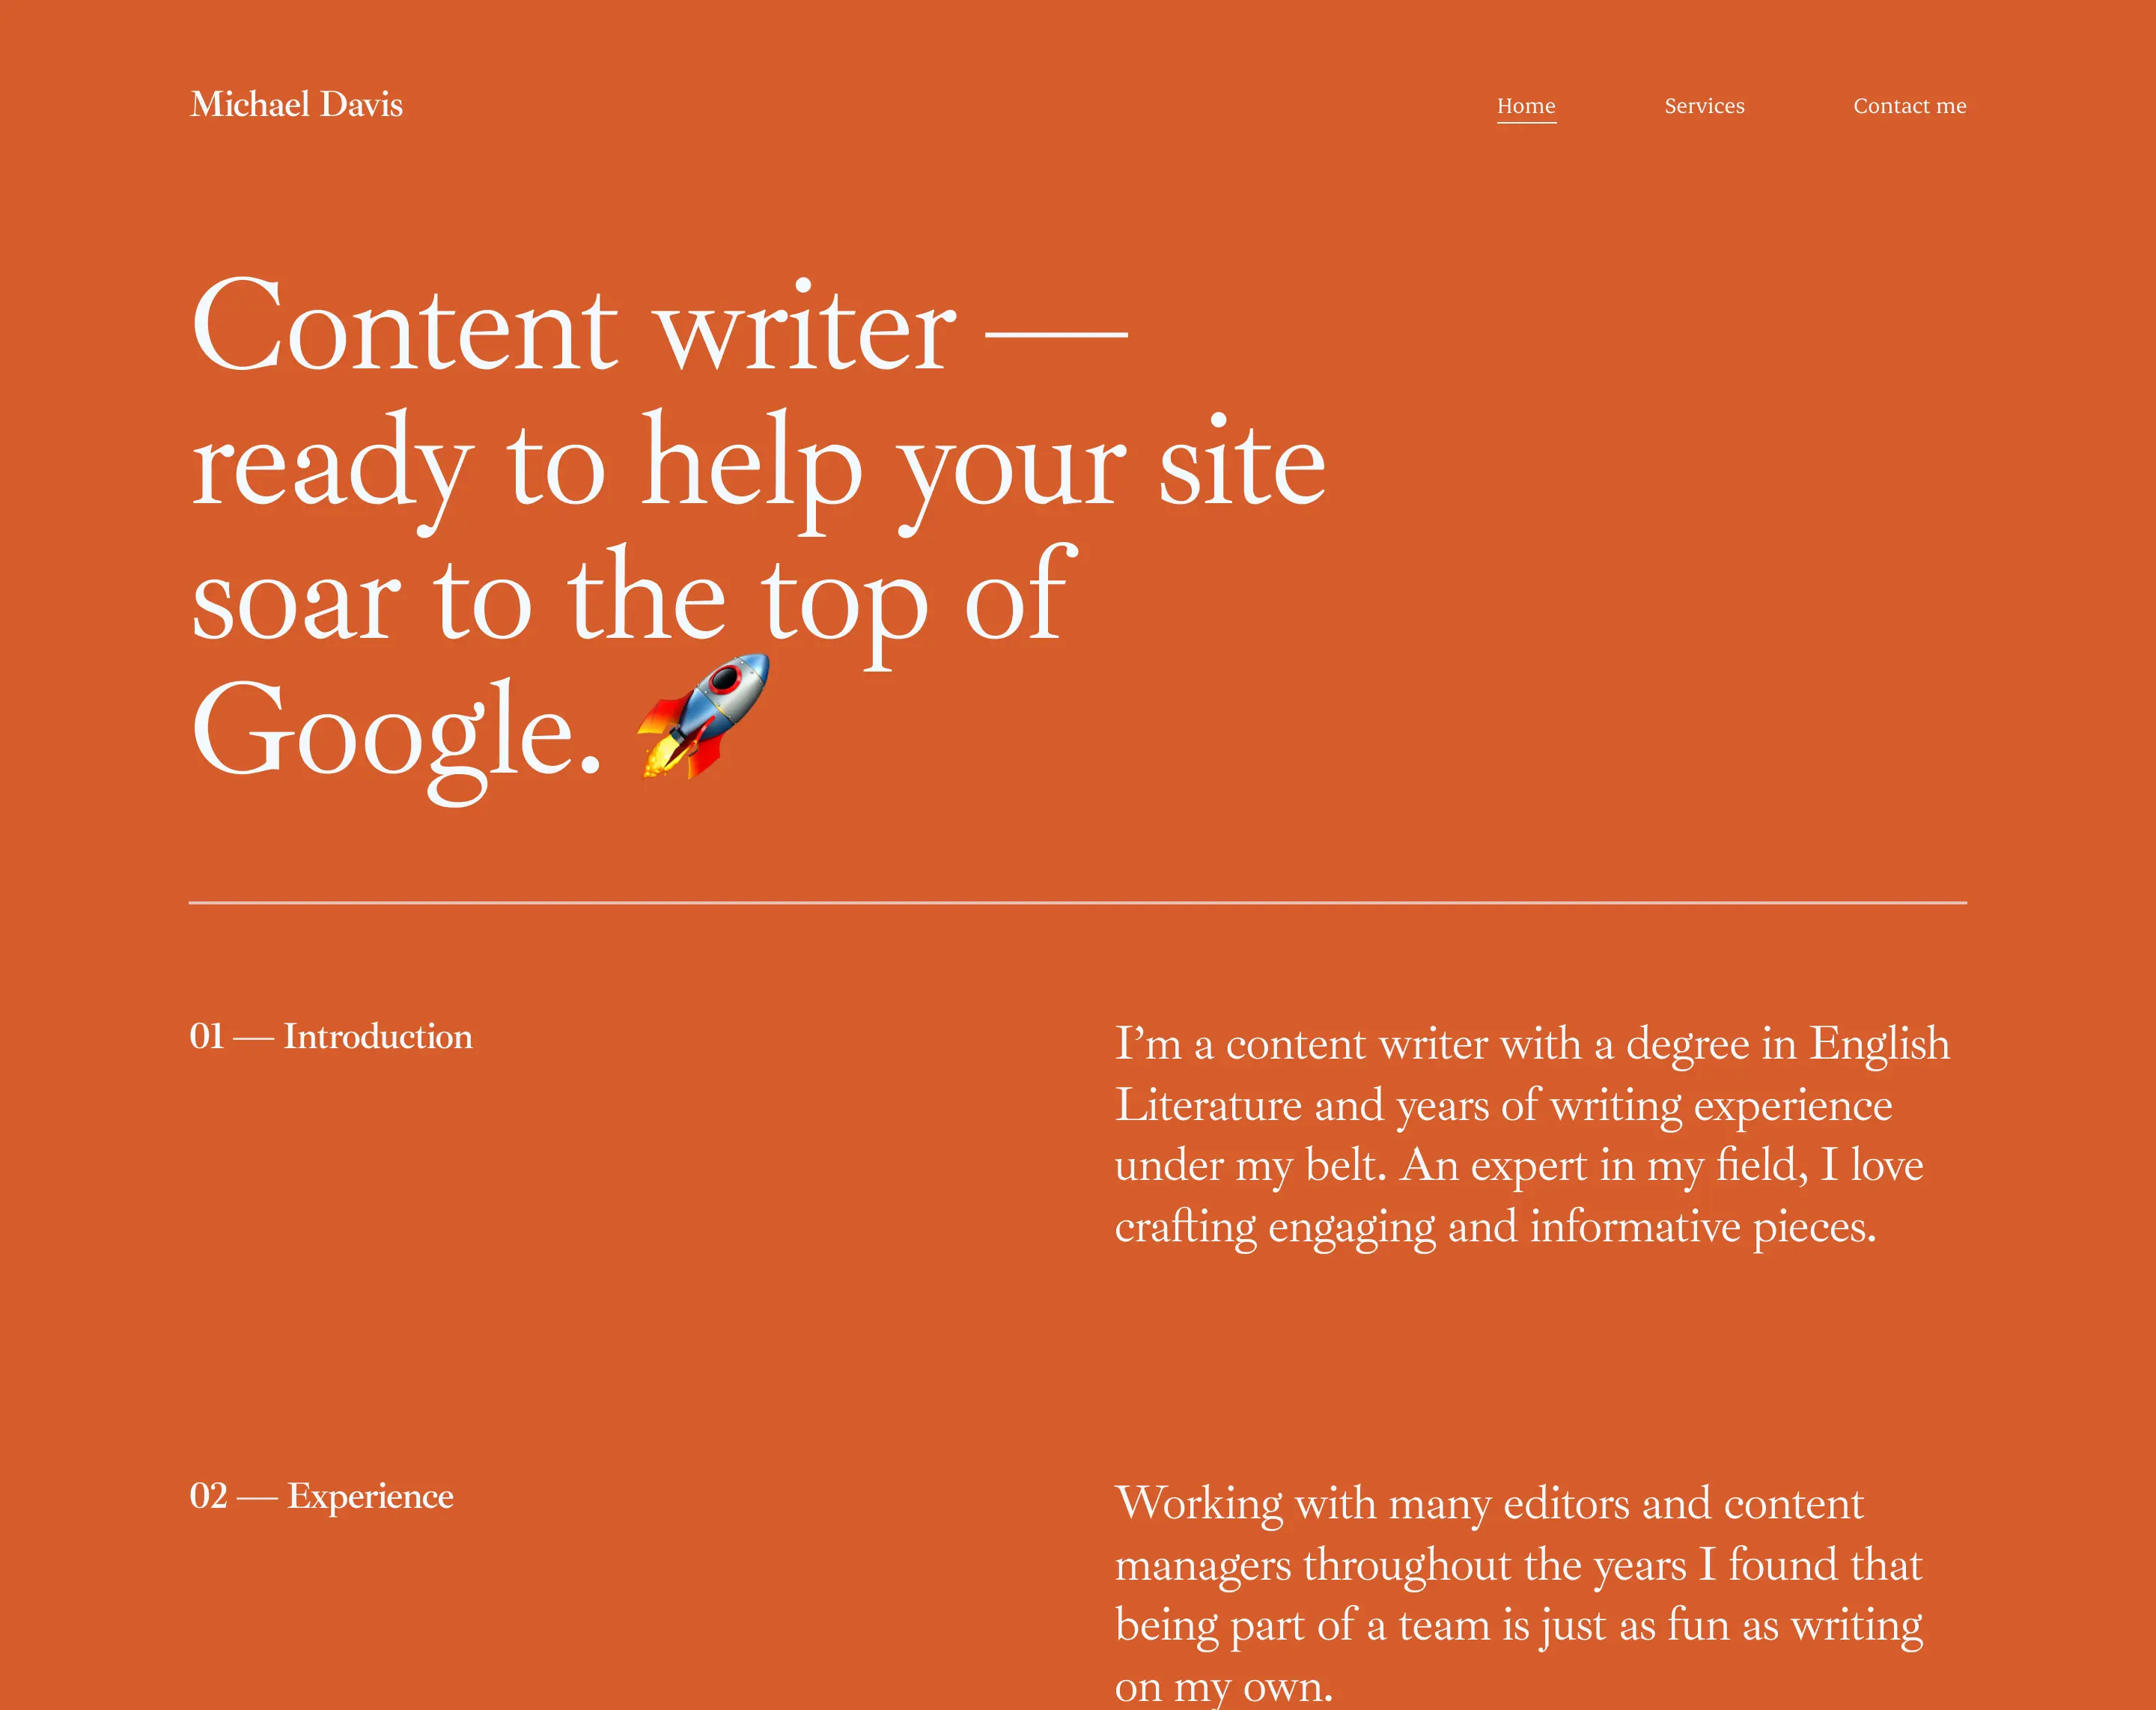 The freelance content writer website of Michael Davis, created with Copyfolio.